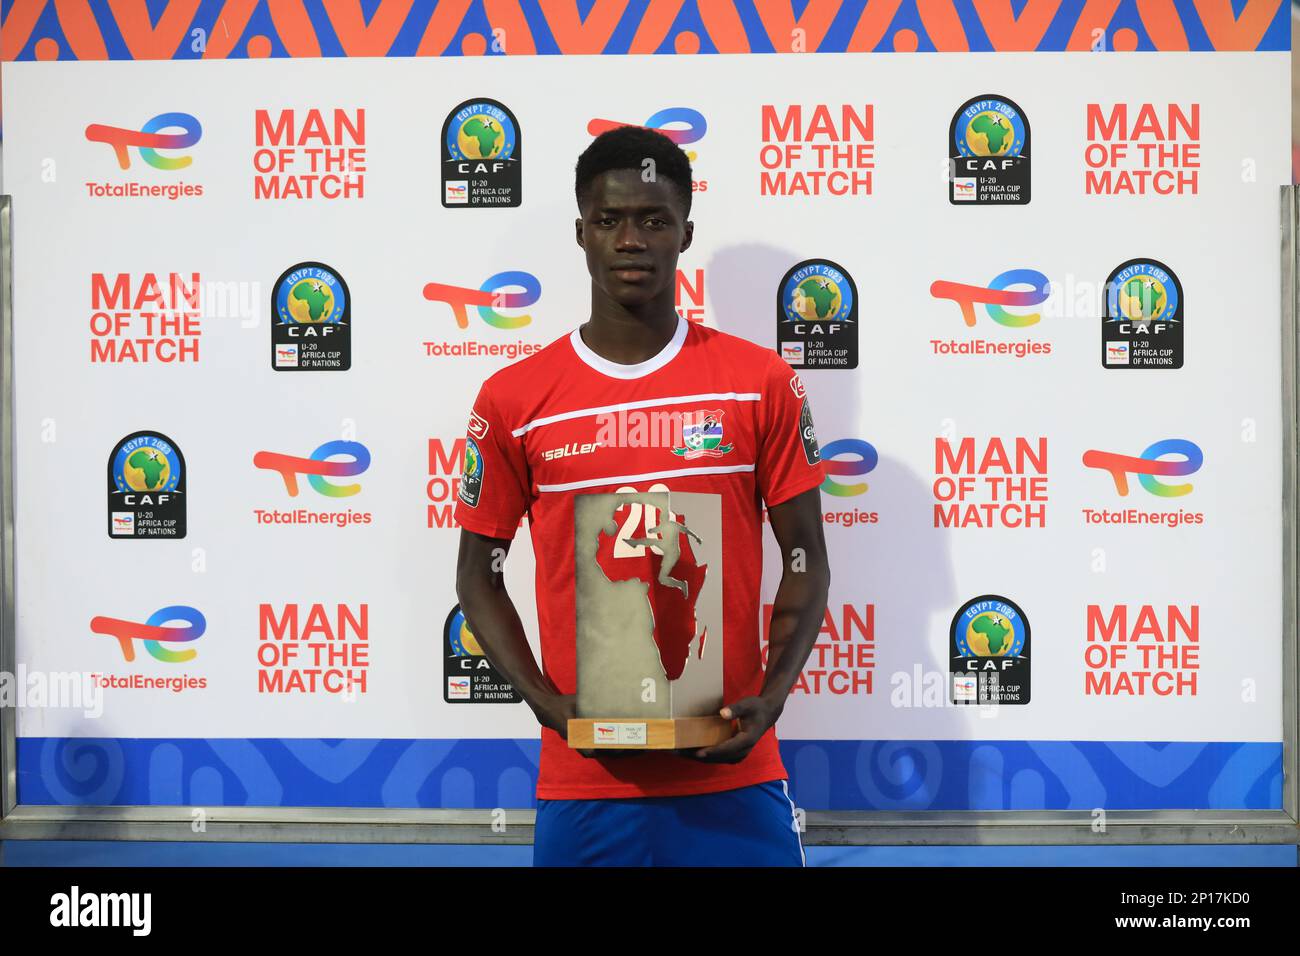 Egypt, Alexandria 03 March 2023 - Adama Bojang of The Gambia with man of the match trophy after the Quarter Final match between Gambia Under 20 and South Sudan Under 20 of TotalEnergies Under 20 Africa Cup of Nations Egypt 2023 and qualify play off for FIFA under 20 World Cup 2023 in Indonesia. Haras El-Hodod Stadium in Alexandria, Egypt, 2023. Photo SFSI Credit: Sebo47/Alamy Live News Stock Photo